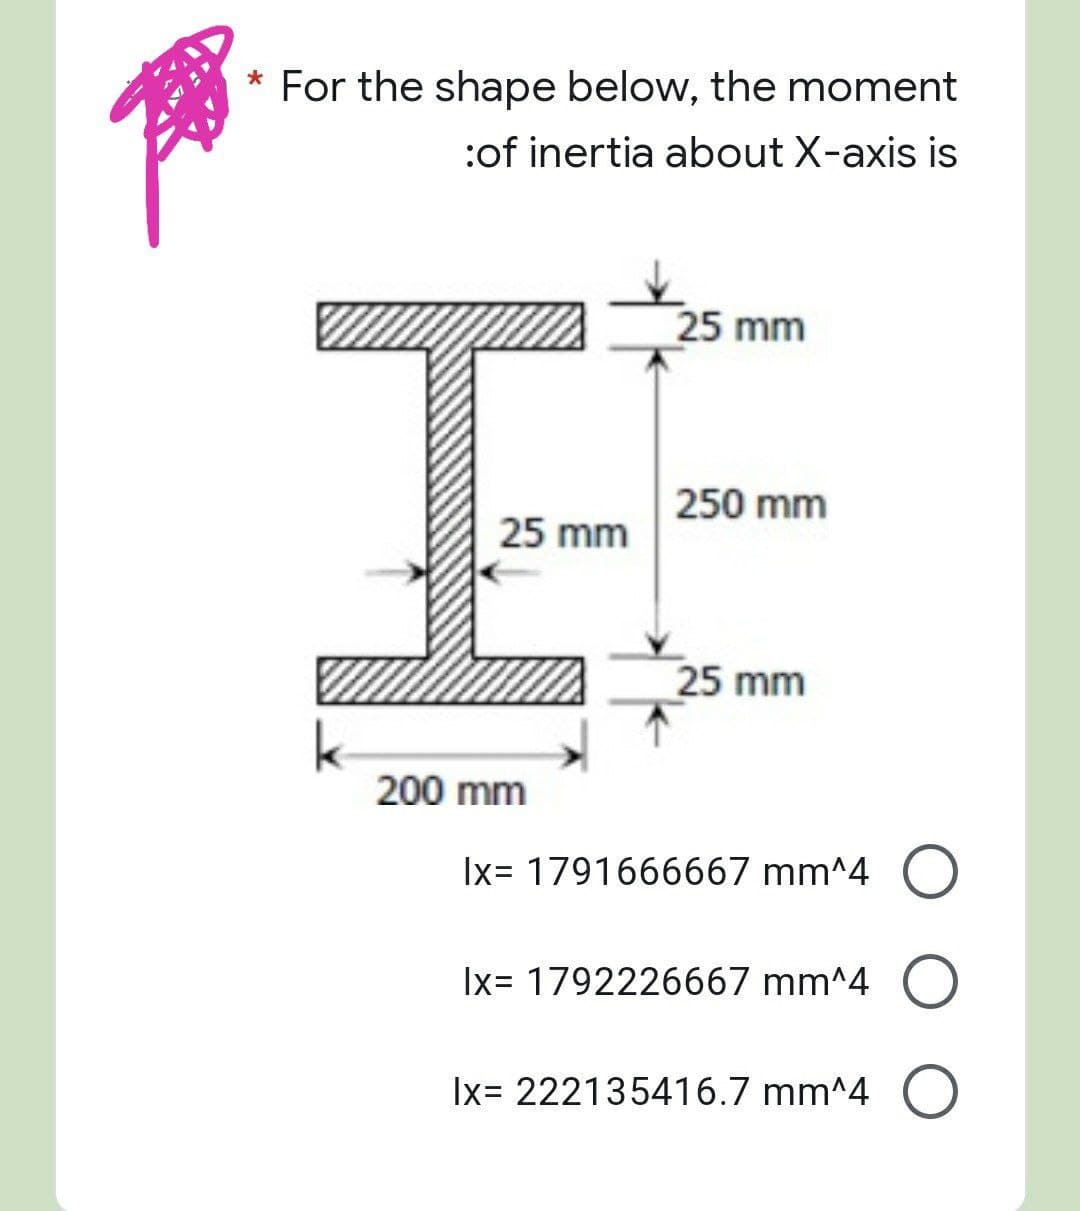 For the shape below, the moment
:of inertia about X-axis is
25 mm
250 mm
25 mm
25 mm
|x= 1791666667 mm^4 O
|x= 1792226667 mm^4 O
Ix= 222135416.7 mm^4 O
200 mm